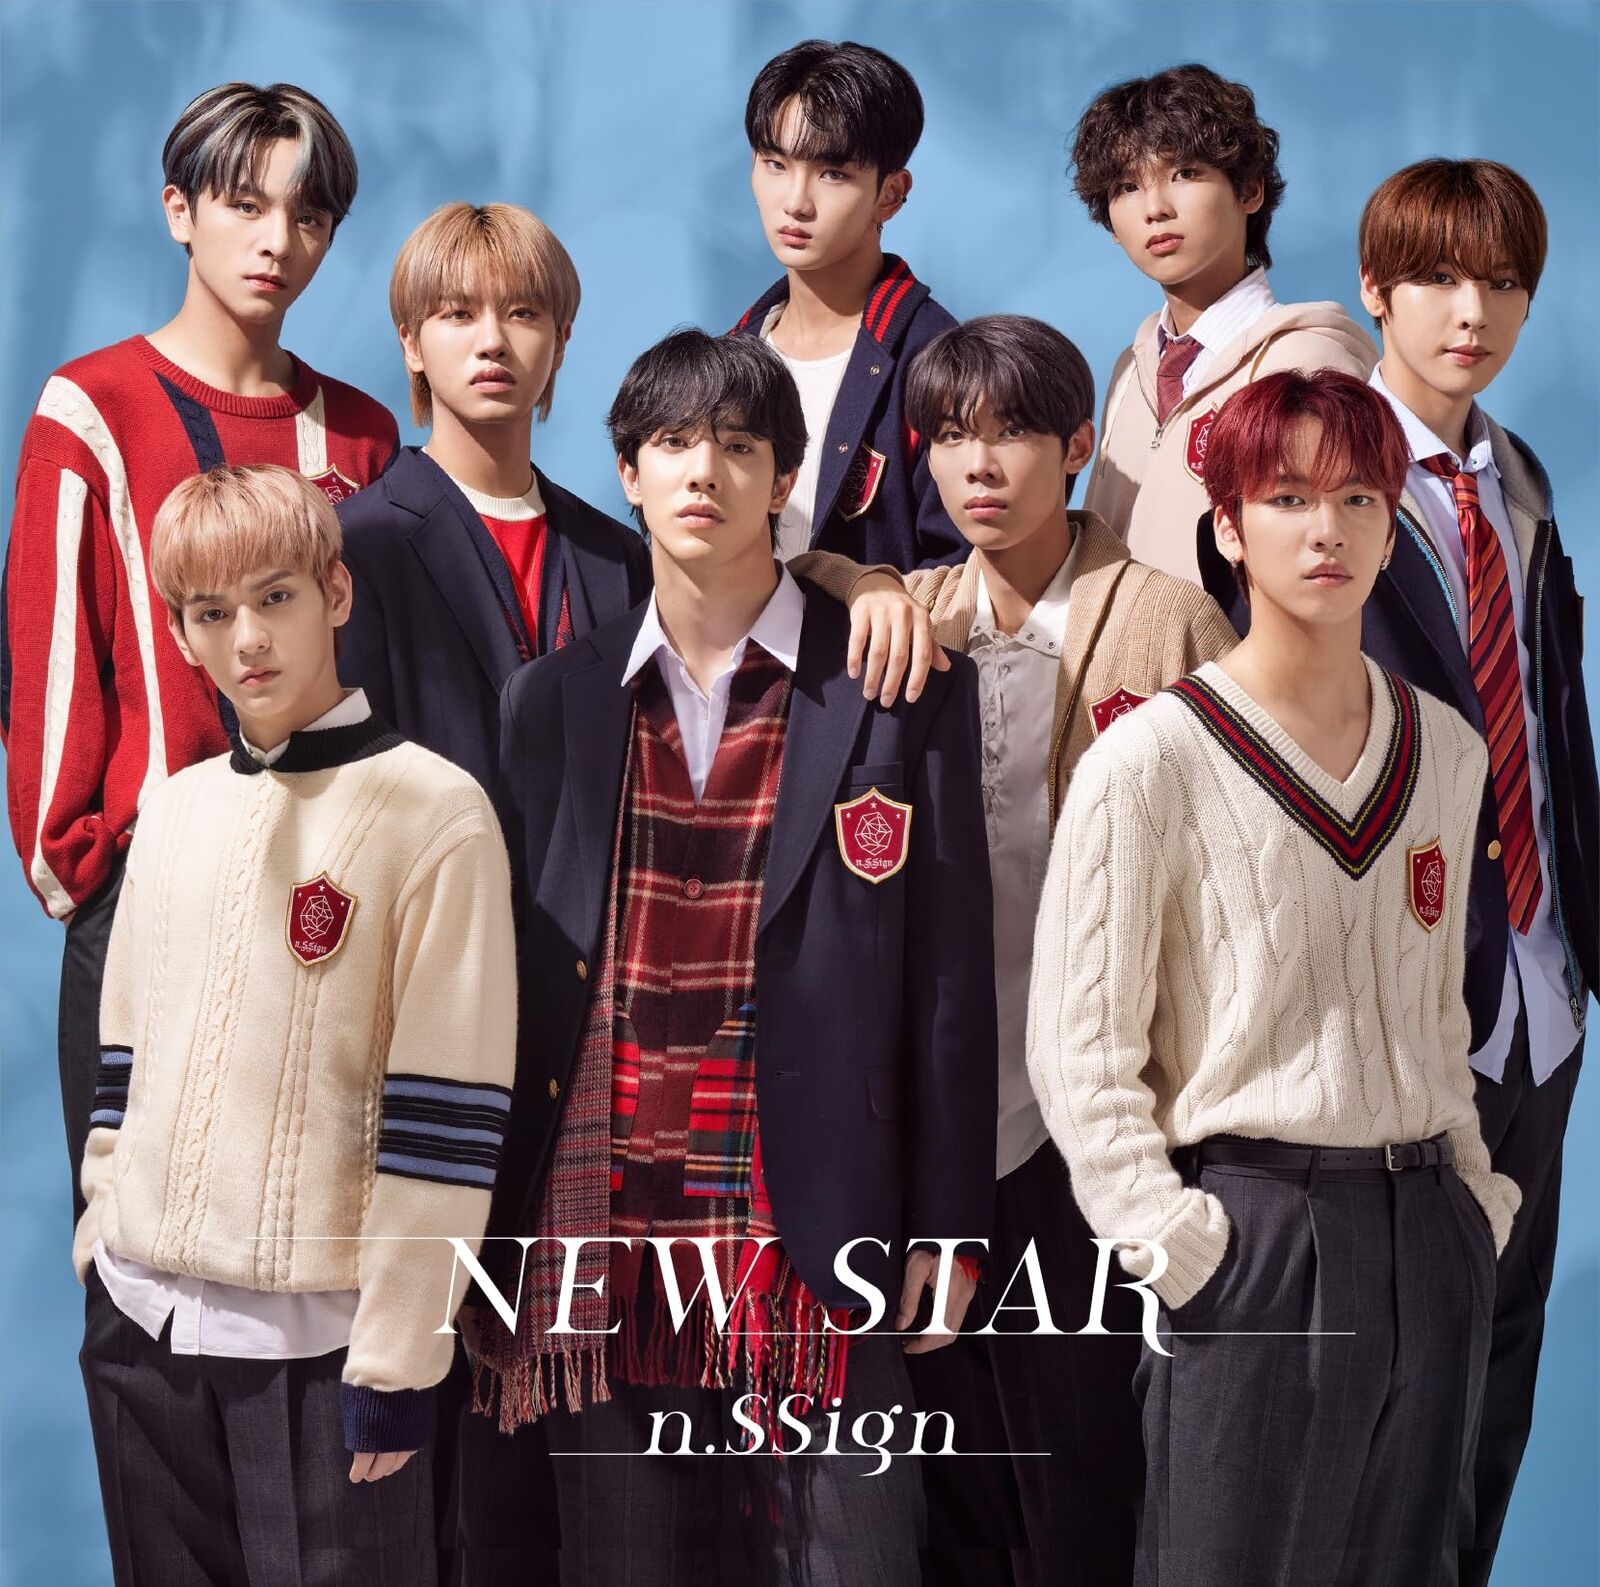 N.ssign New Star (CD)